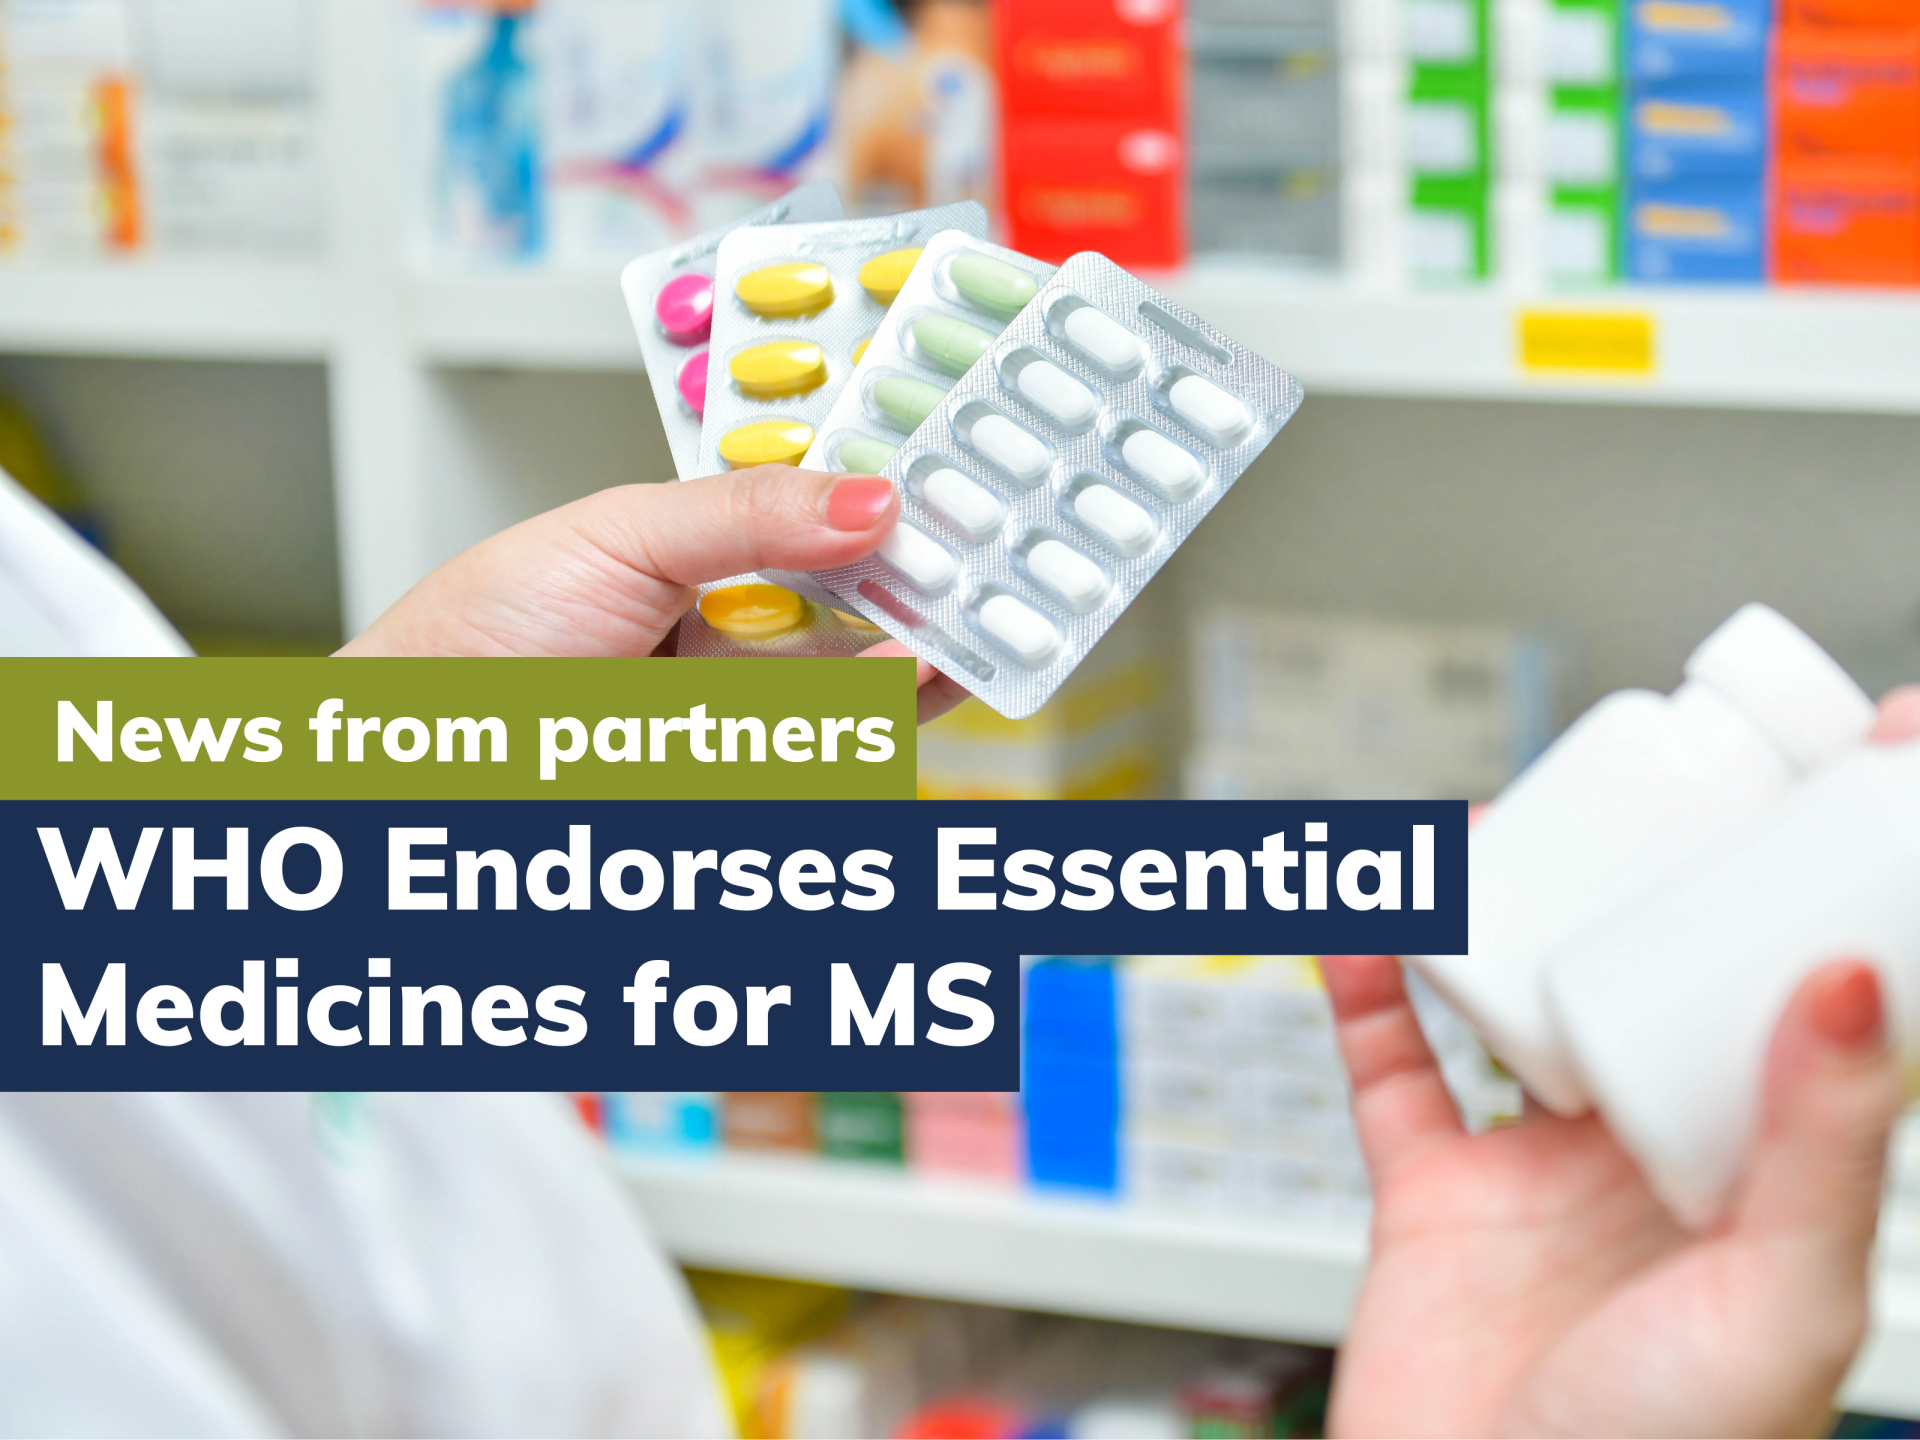 WHO Endorses Essential Medicines for Multiple Sclerosis